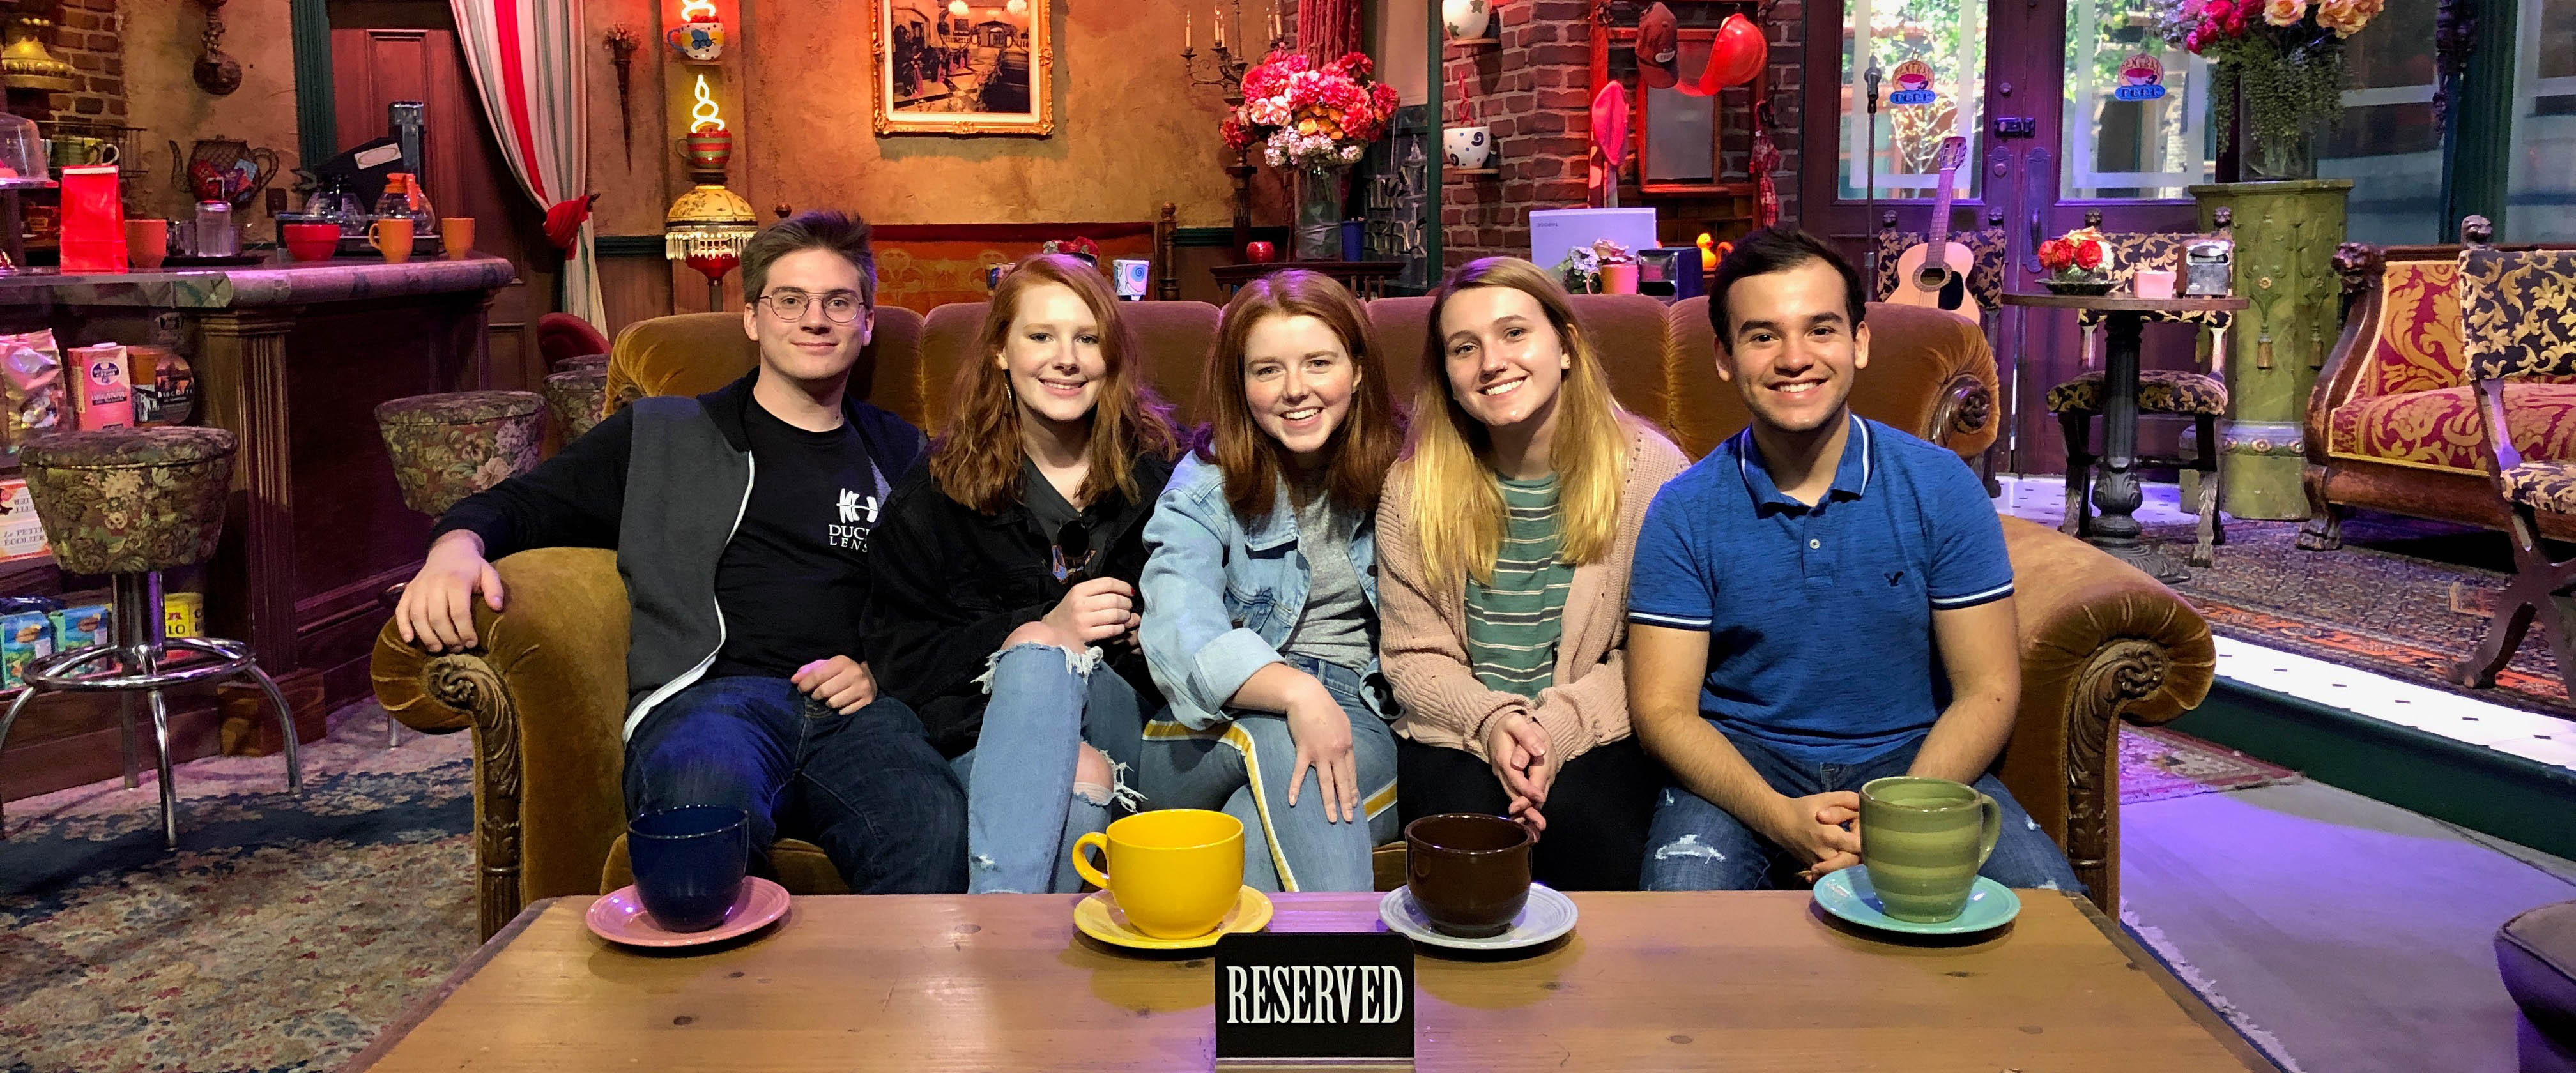 Belmont USA students pose on the couch in the coffee shop from the set of Friends